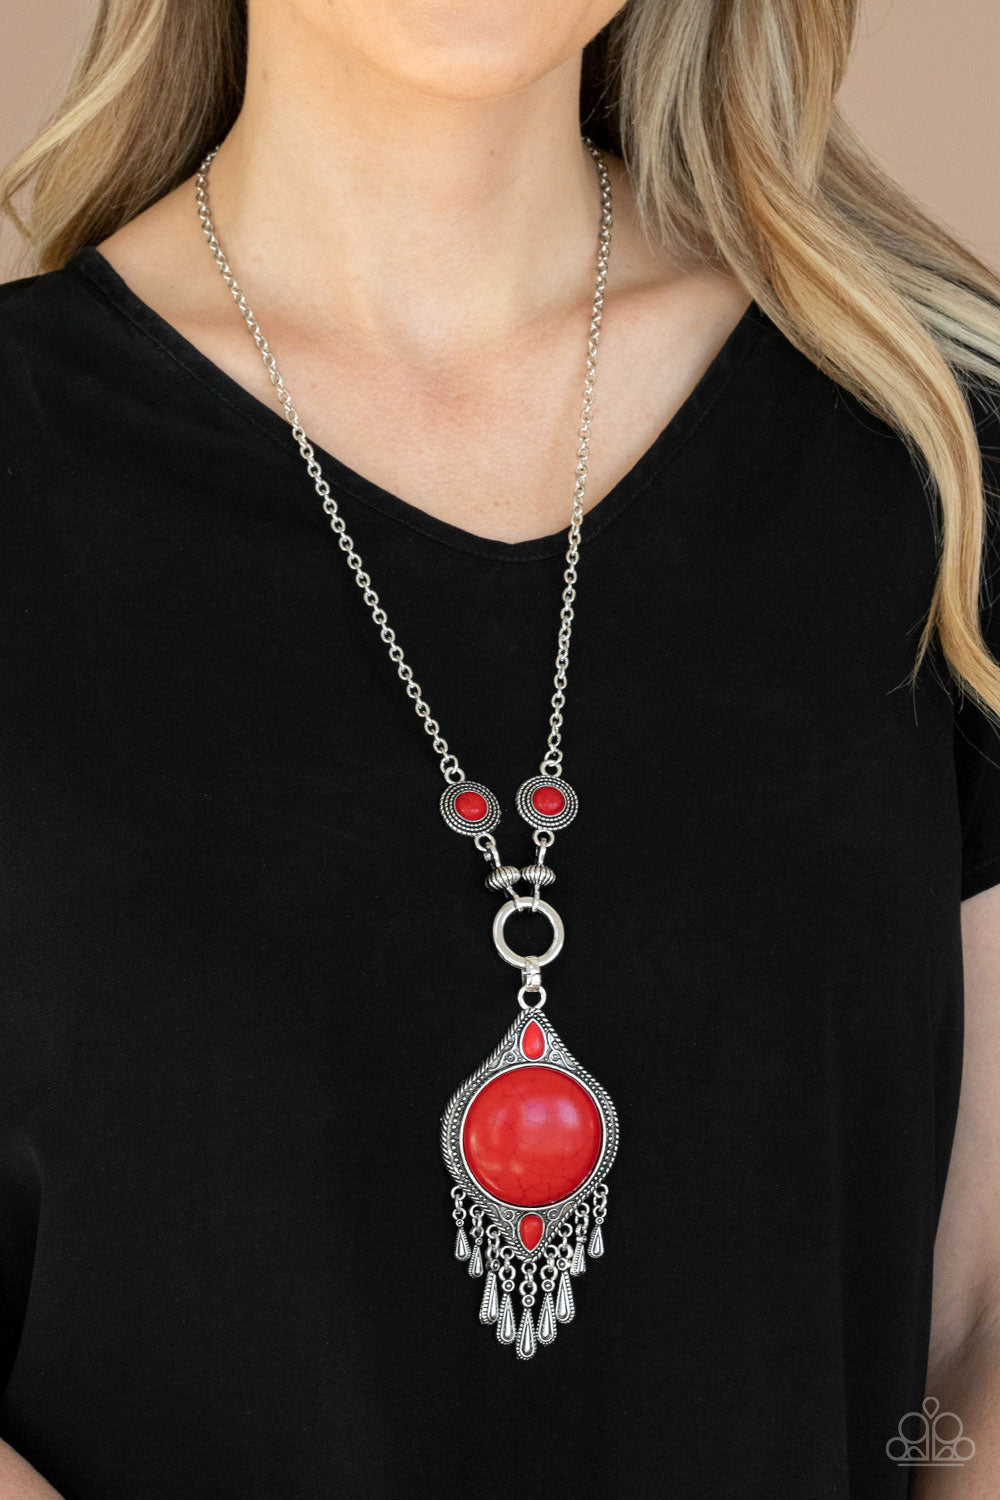 Majestic Mountaineer Necklace - Red